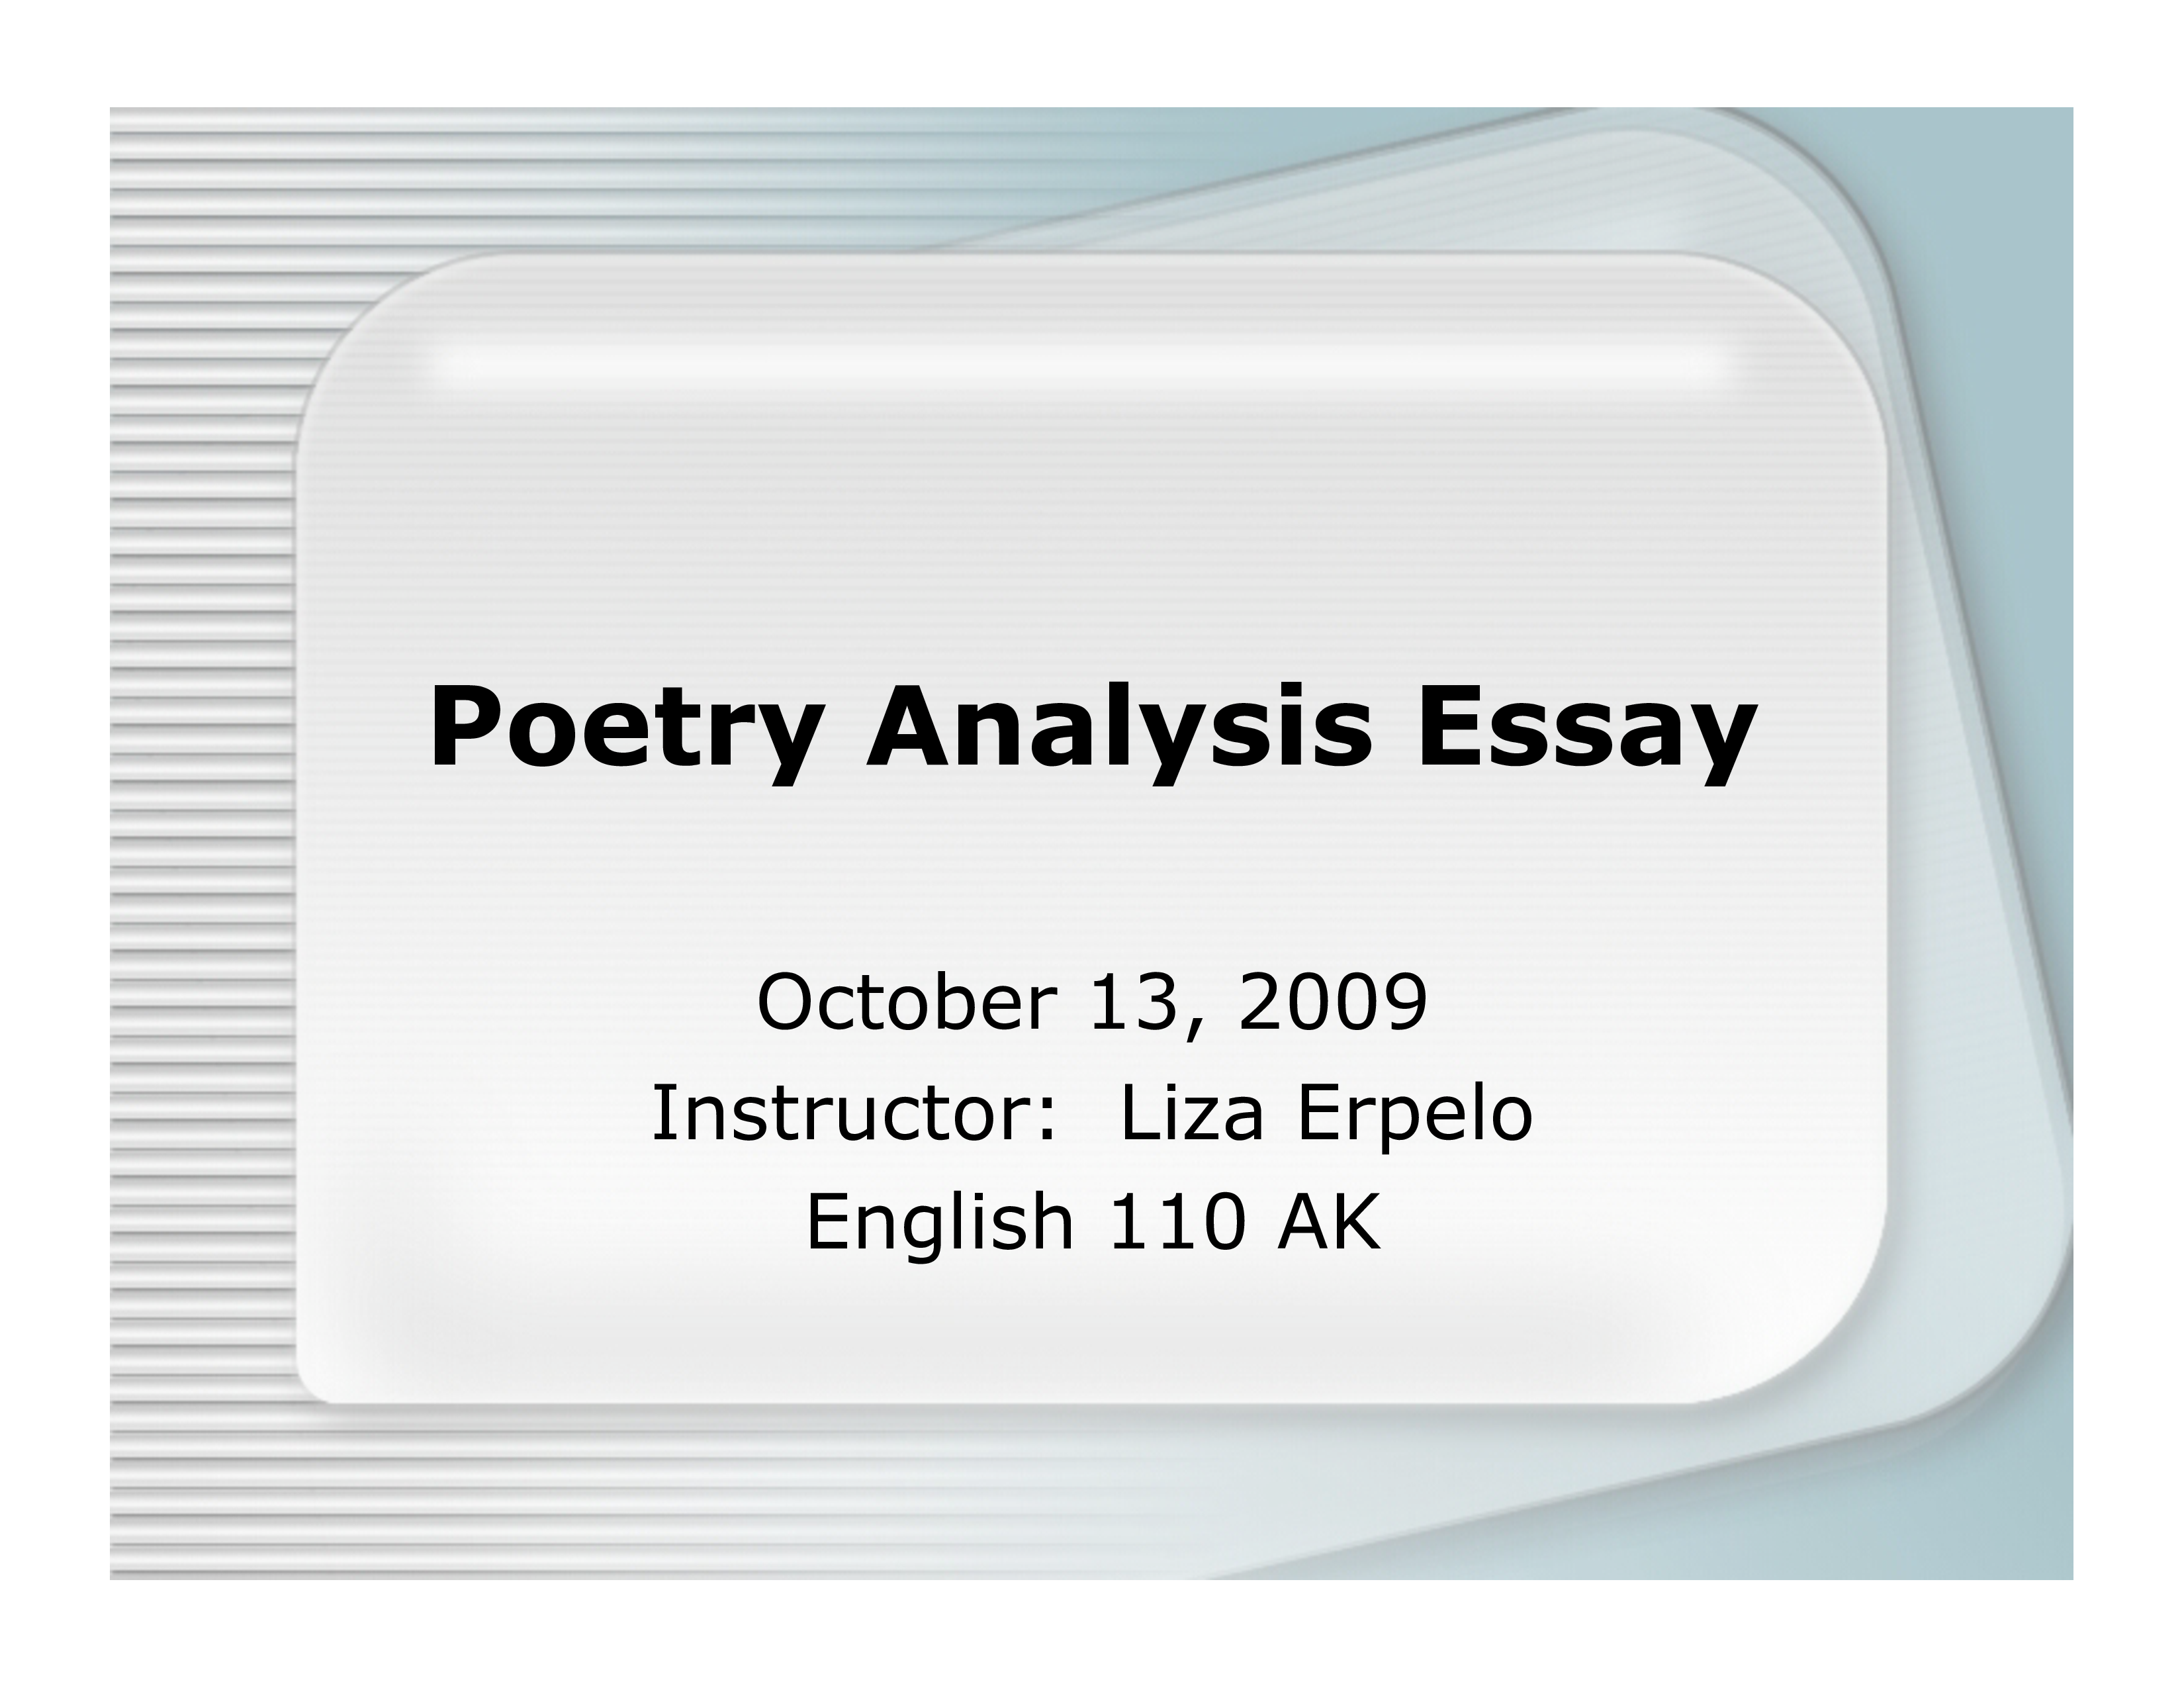 thesis statement examples for poetry analysis